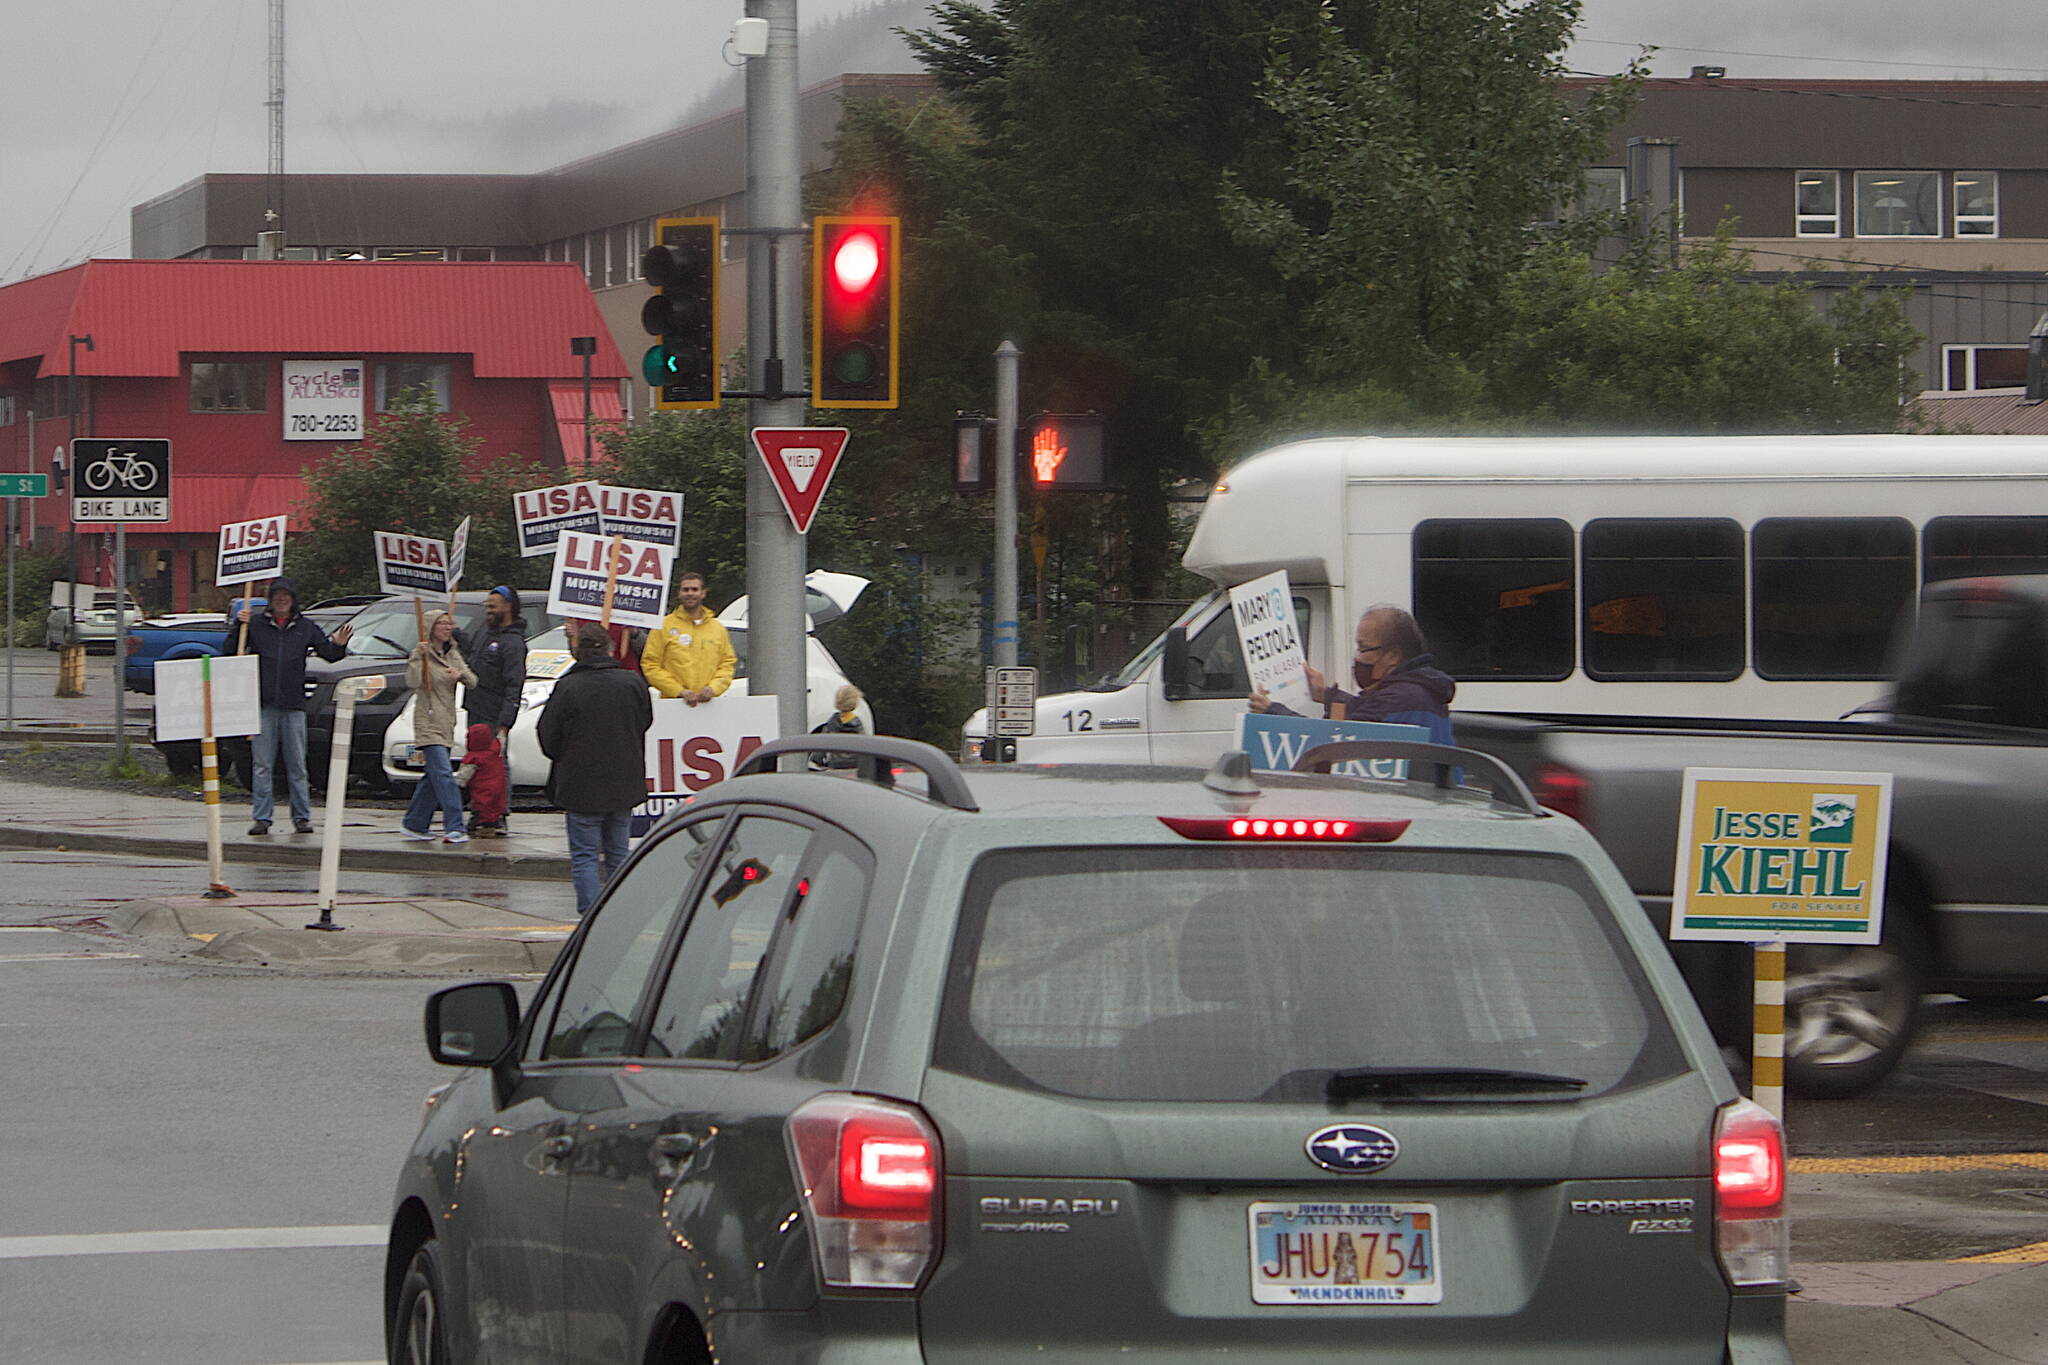 Supporters of candidates from various parties in the races for U.S. House, U.S. Senate, governor and Alaska State Legislature waves signs during rush hour in the rain at the intersection of Egan Drive and 10th St. (Mark Sabbatini / Juneau Empire)